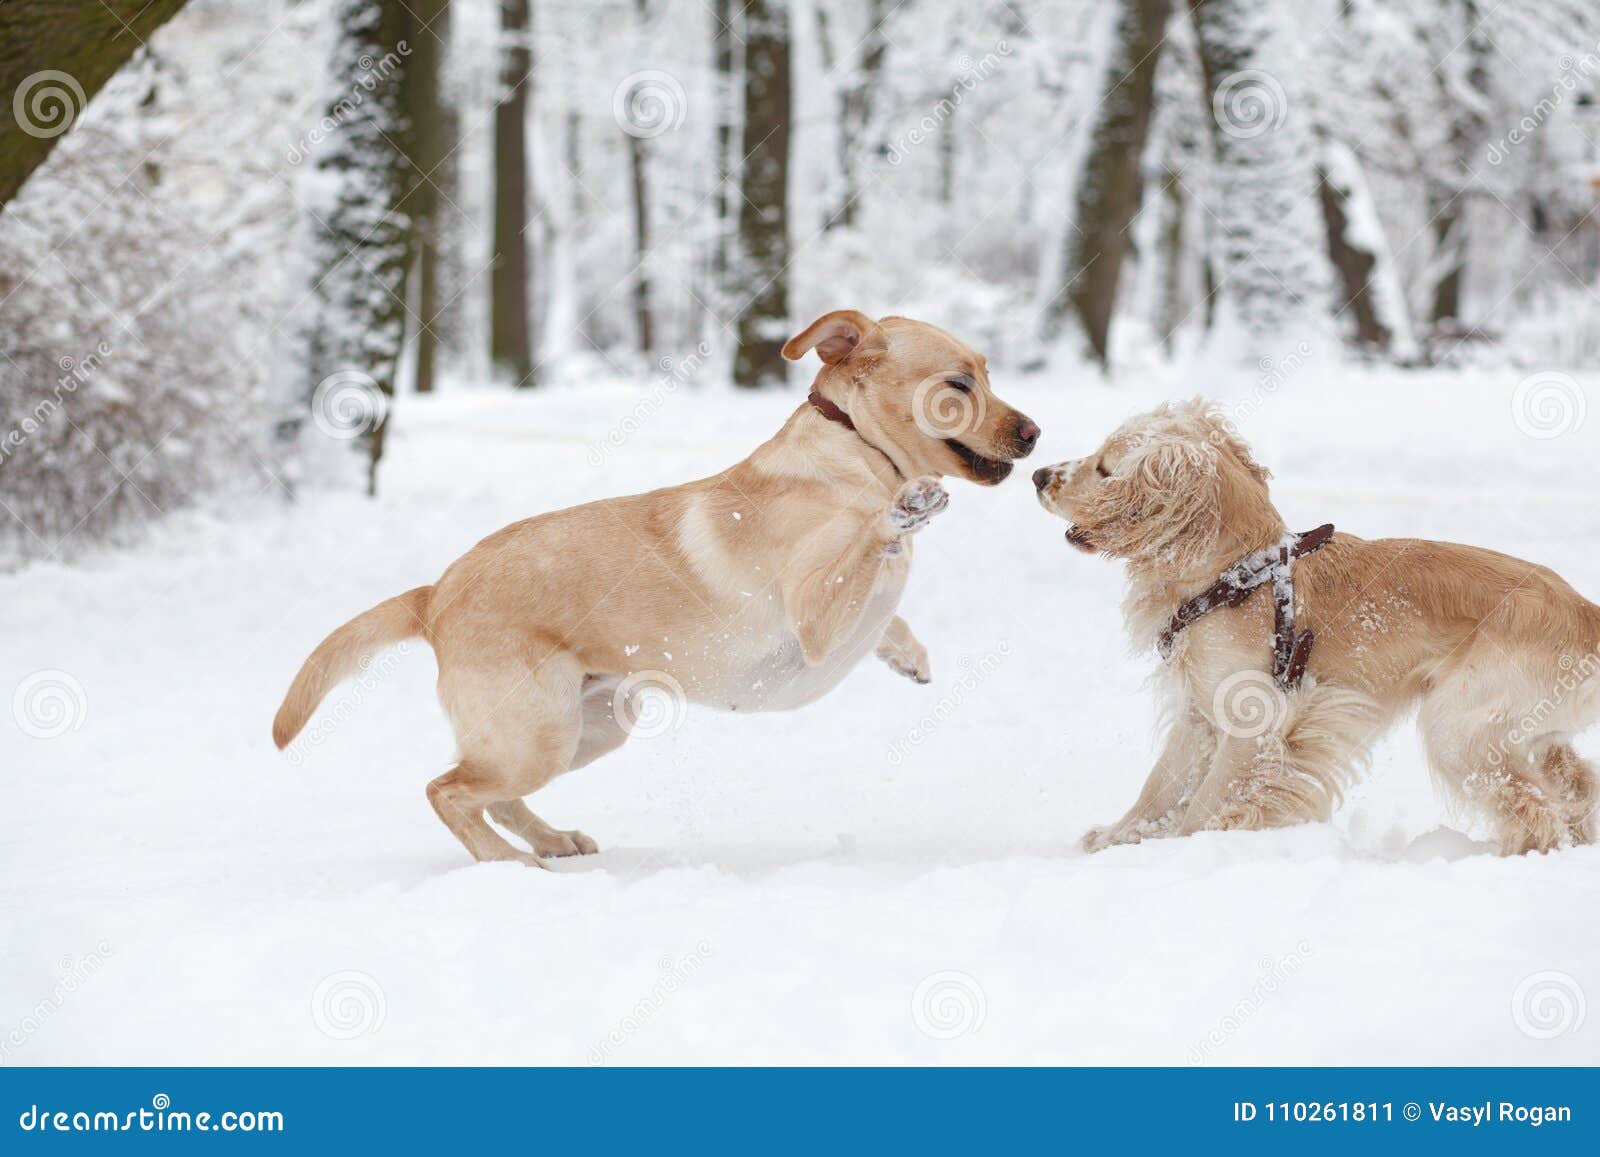 Dogs Playing In Snow Winter Dog Walk In The Park Stock Image Image Of Jump Little